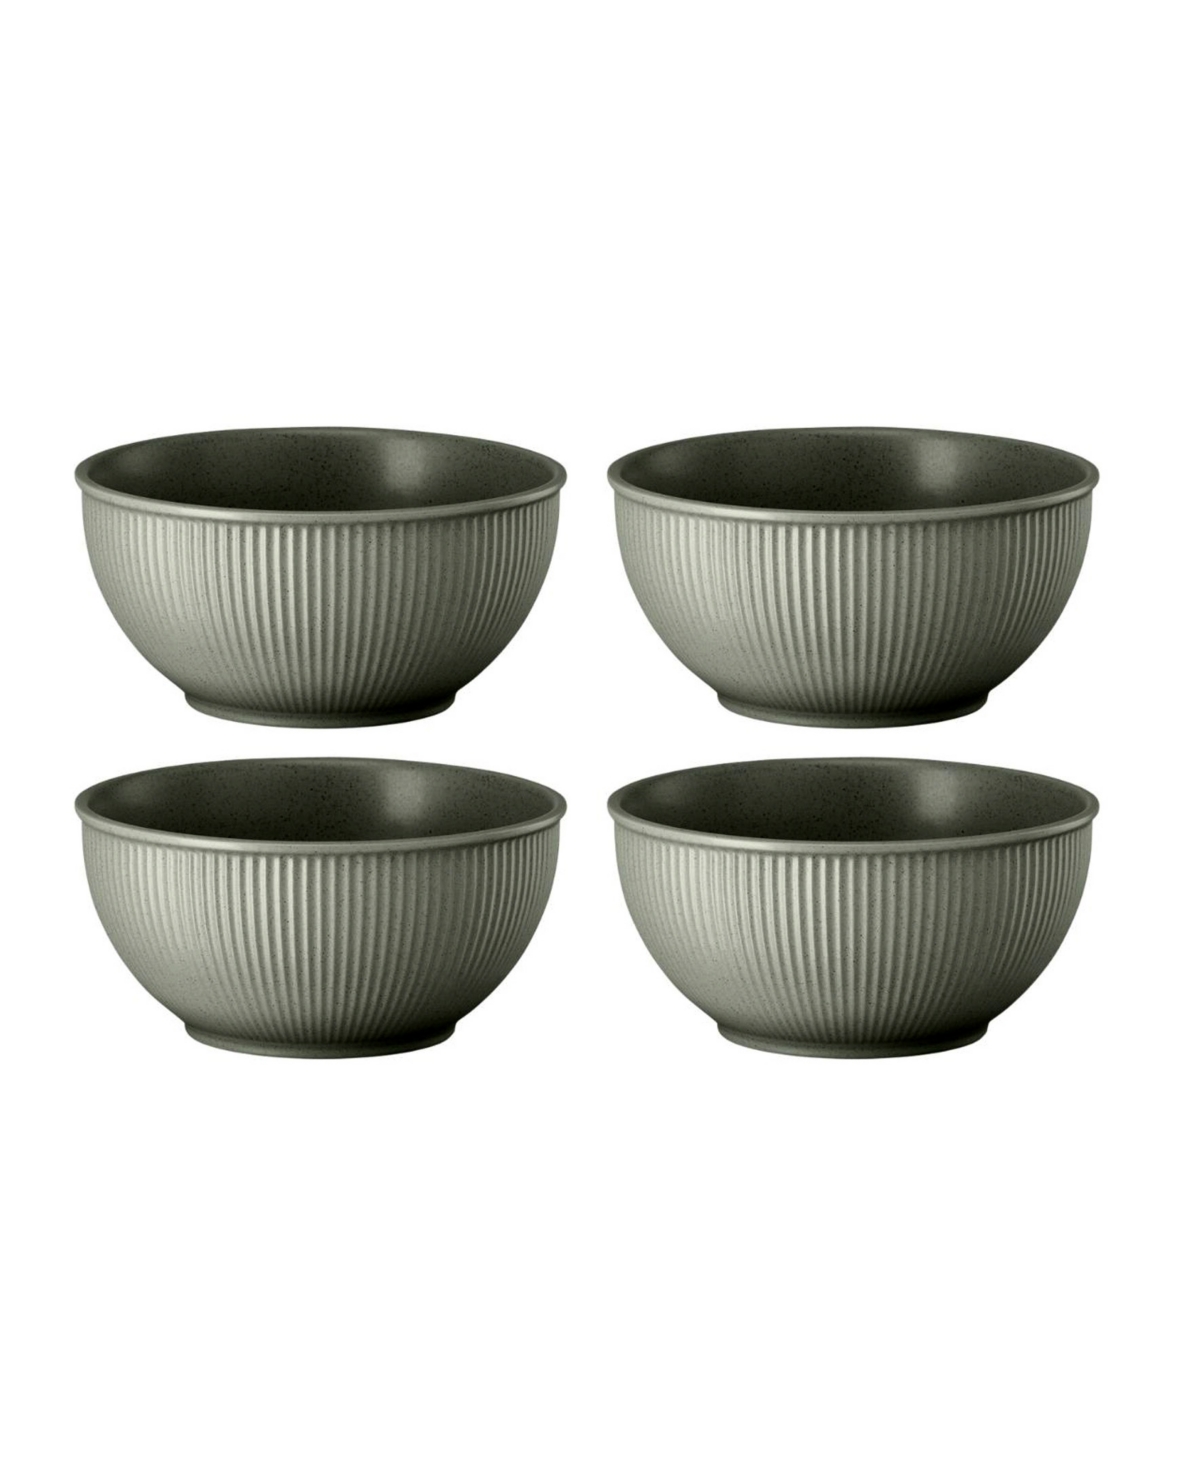 Clay Set of 4 Cereal Bowls, Service for 4 - Gray